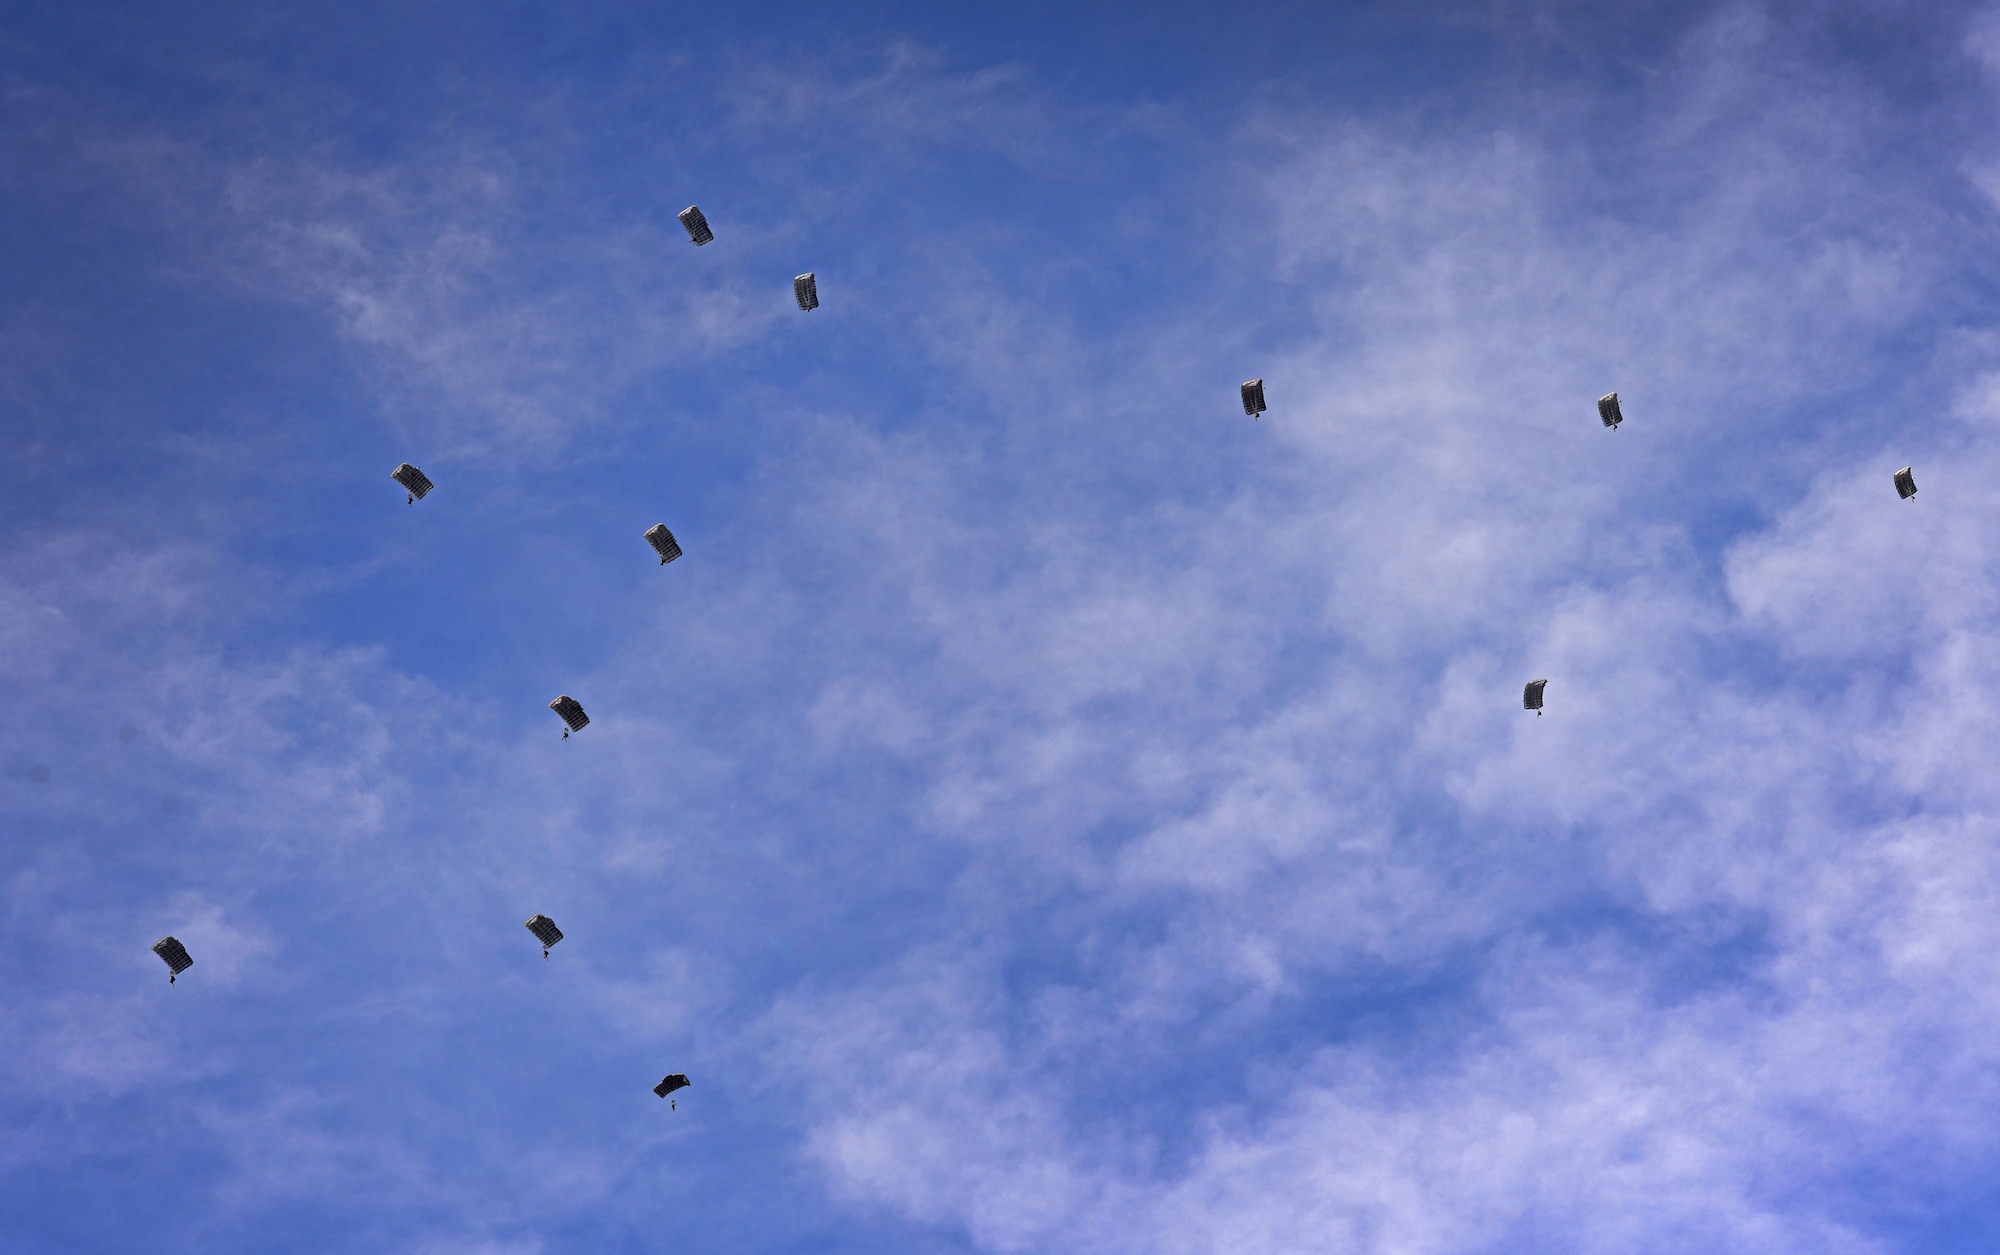 A dozen members of the 26th Special Tactics Squadron parachute down from an aircraft over the flightline March 25, 2016, at Cannon Air Force Base, N.M. Special Tactics Airmen train to maintain operational readiness, able to infiltrate into areas where aircraft cannot land. (U.S. Air Force photo/Staff Sgt. Alexx Pons) 